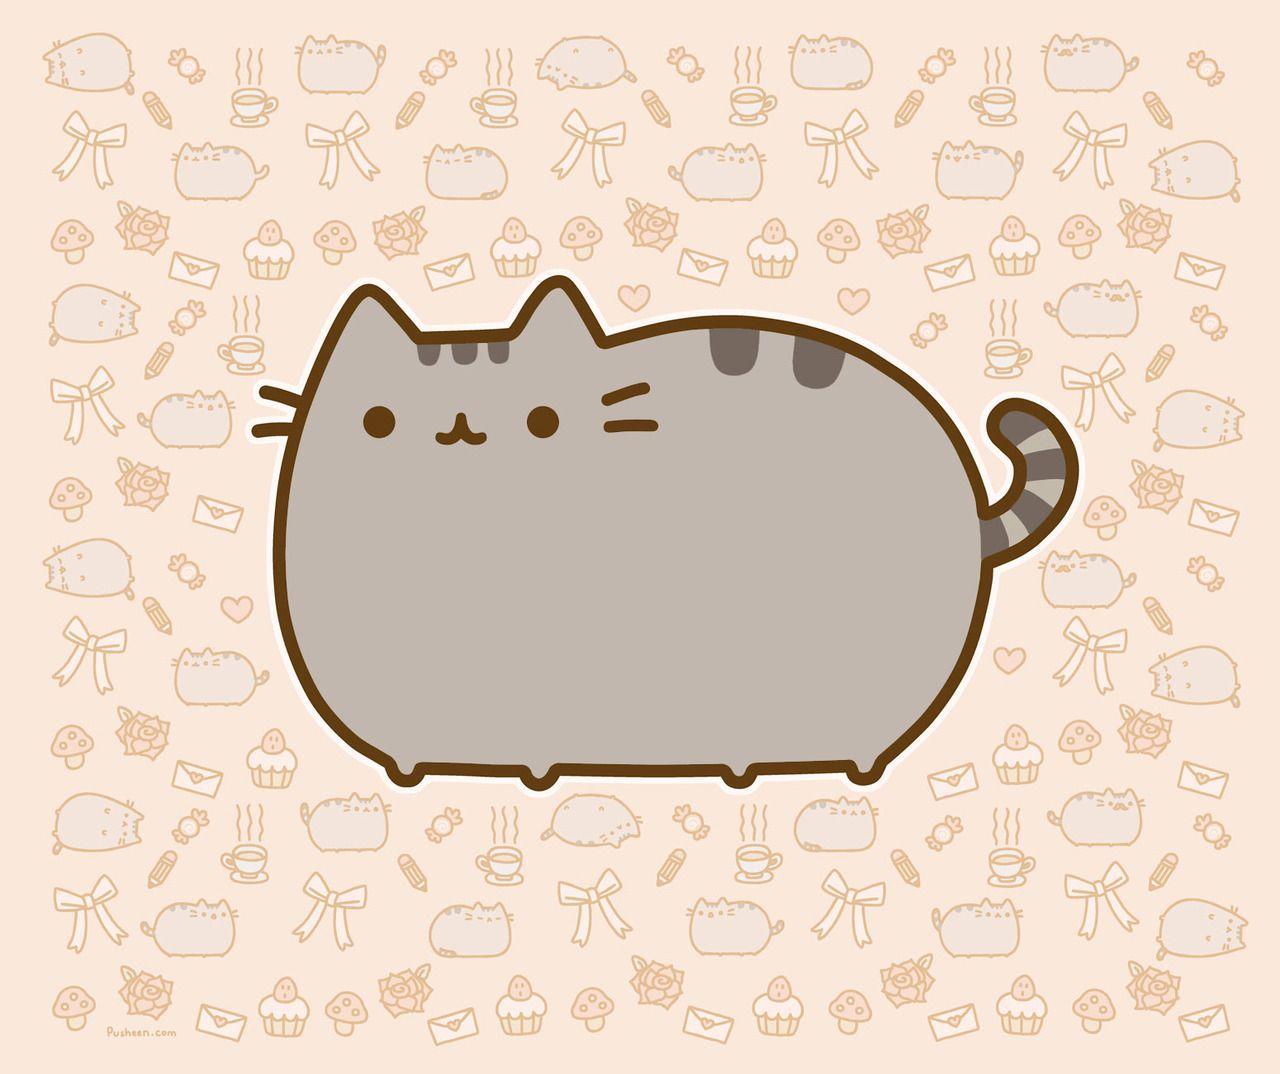 Pusheen cat wallpaper, free to download and use for your desktop, laptop, tablet or phone - Pusheen